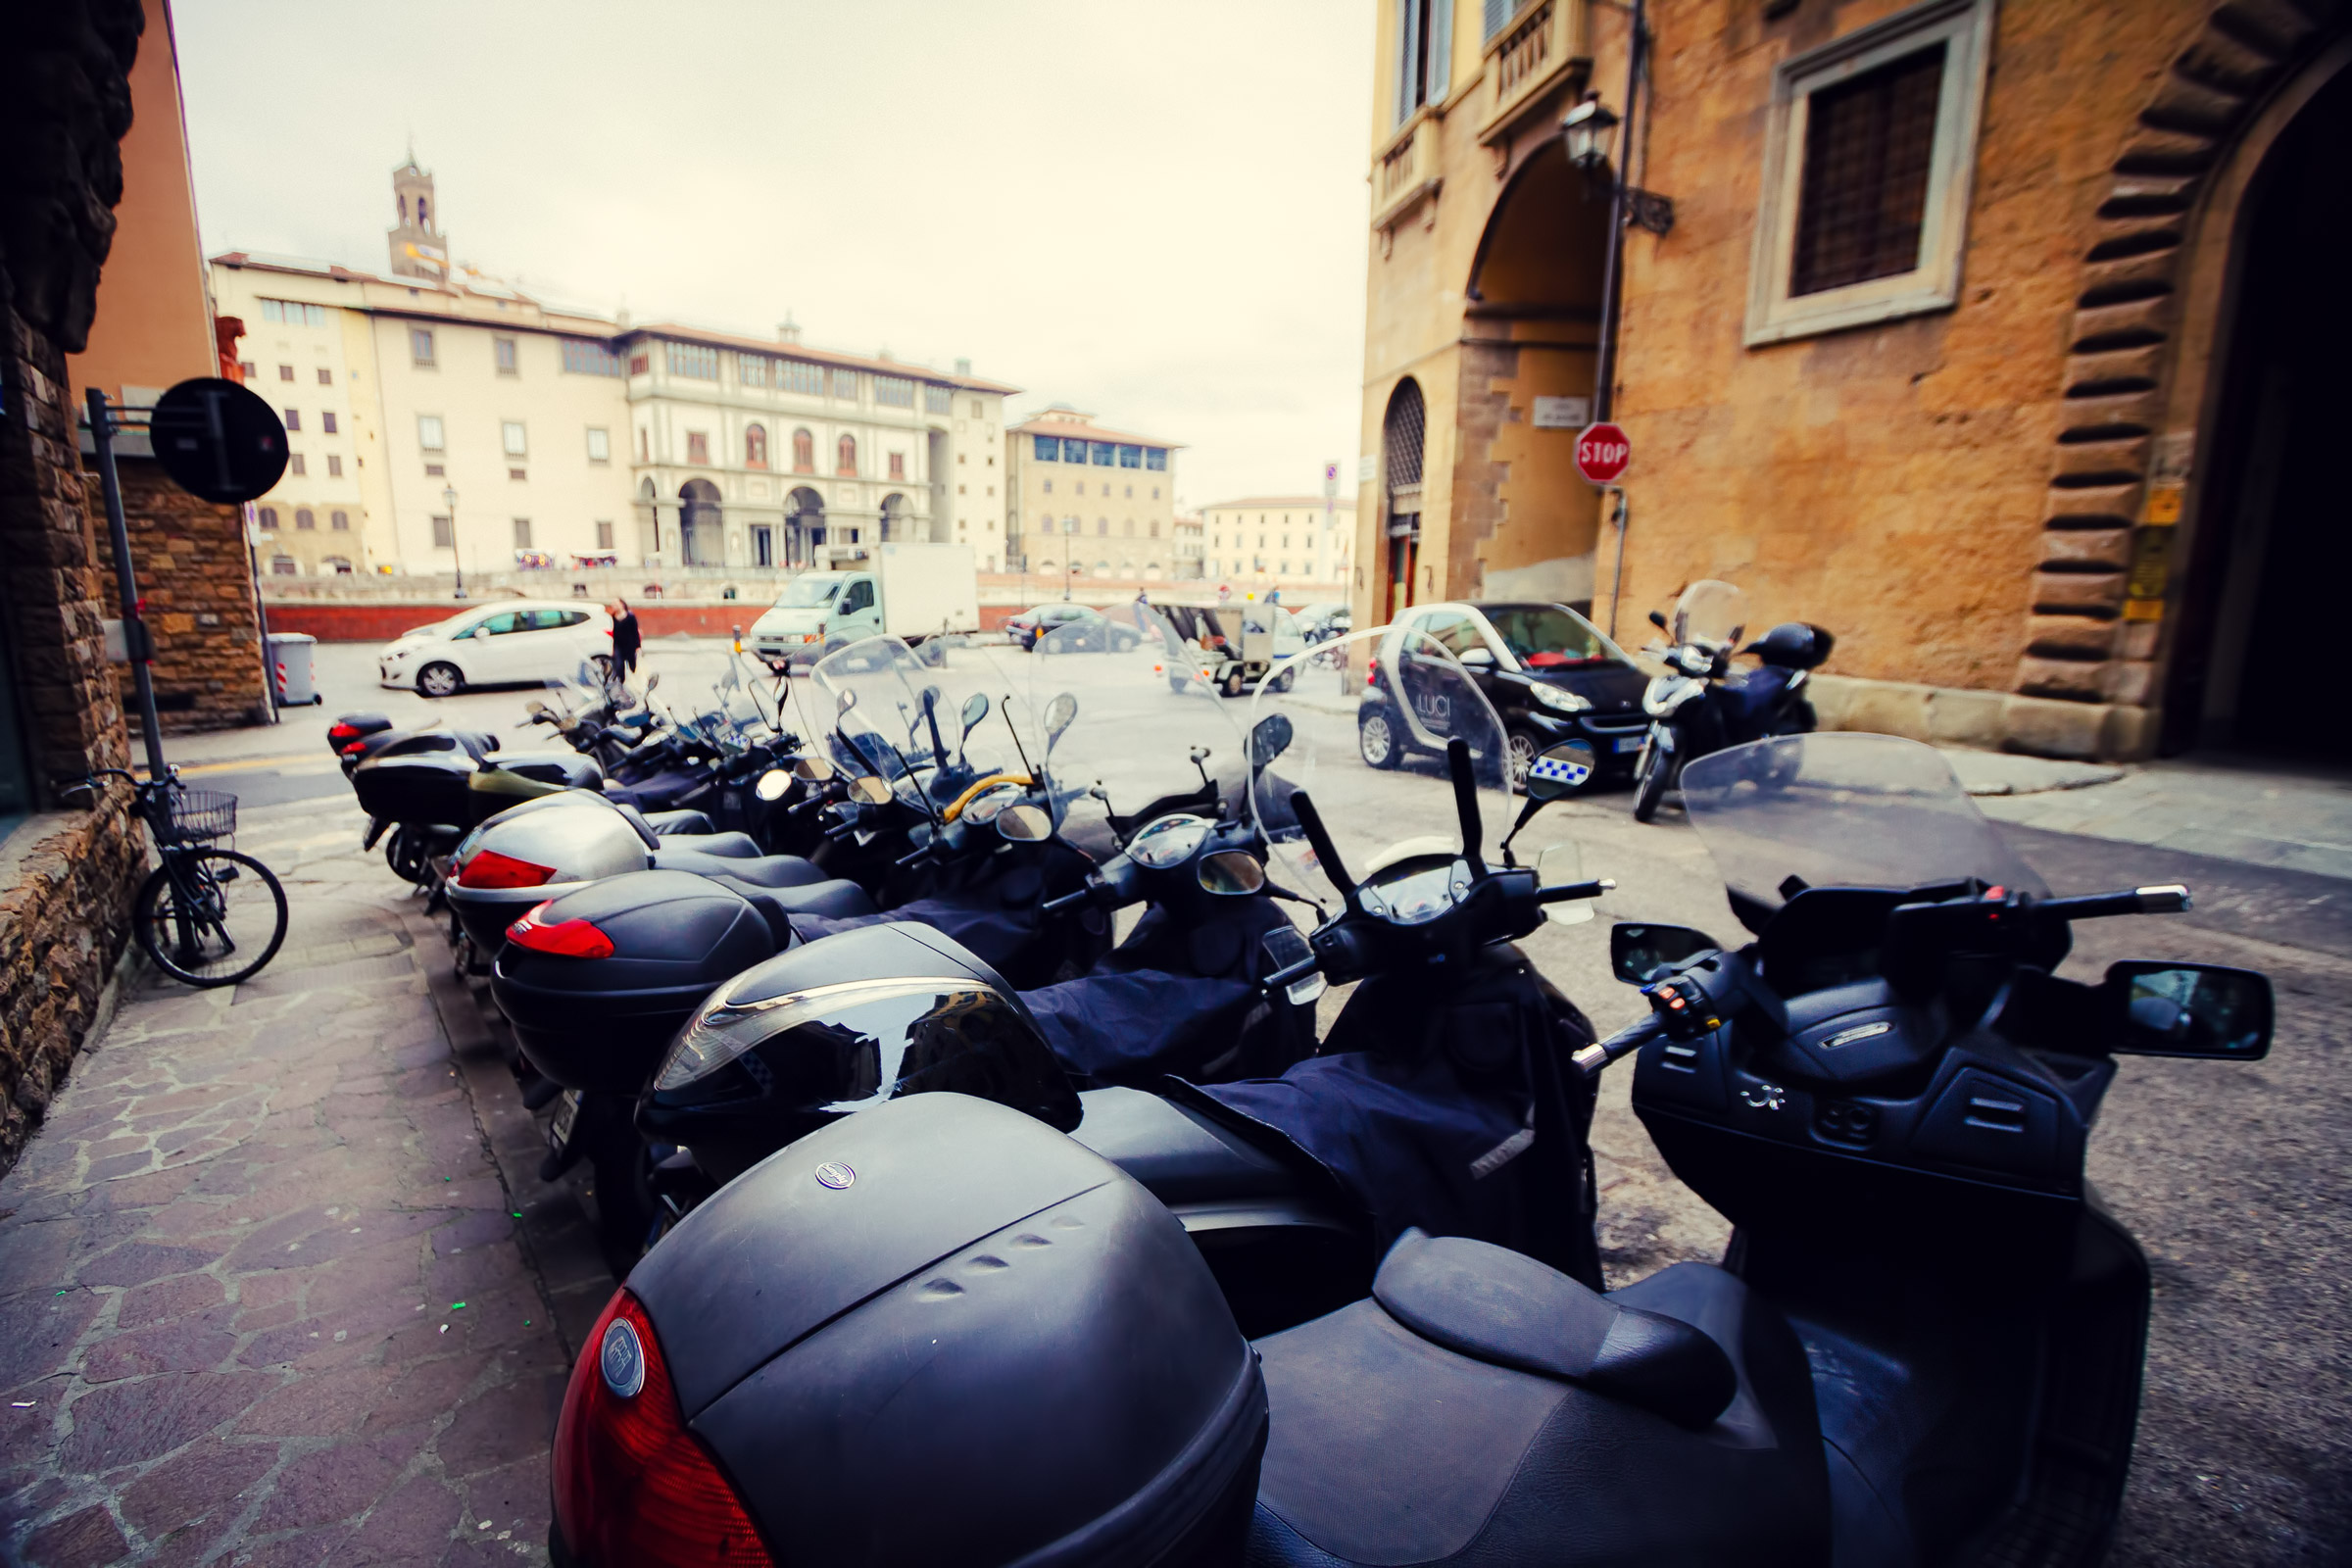 Scooters in Piazza Santa Maria Soprarno, Florence, Italy